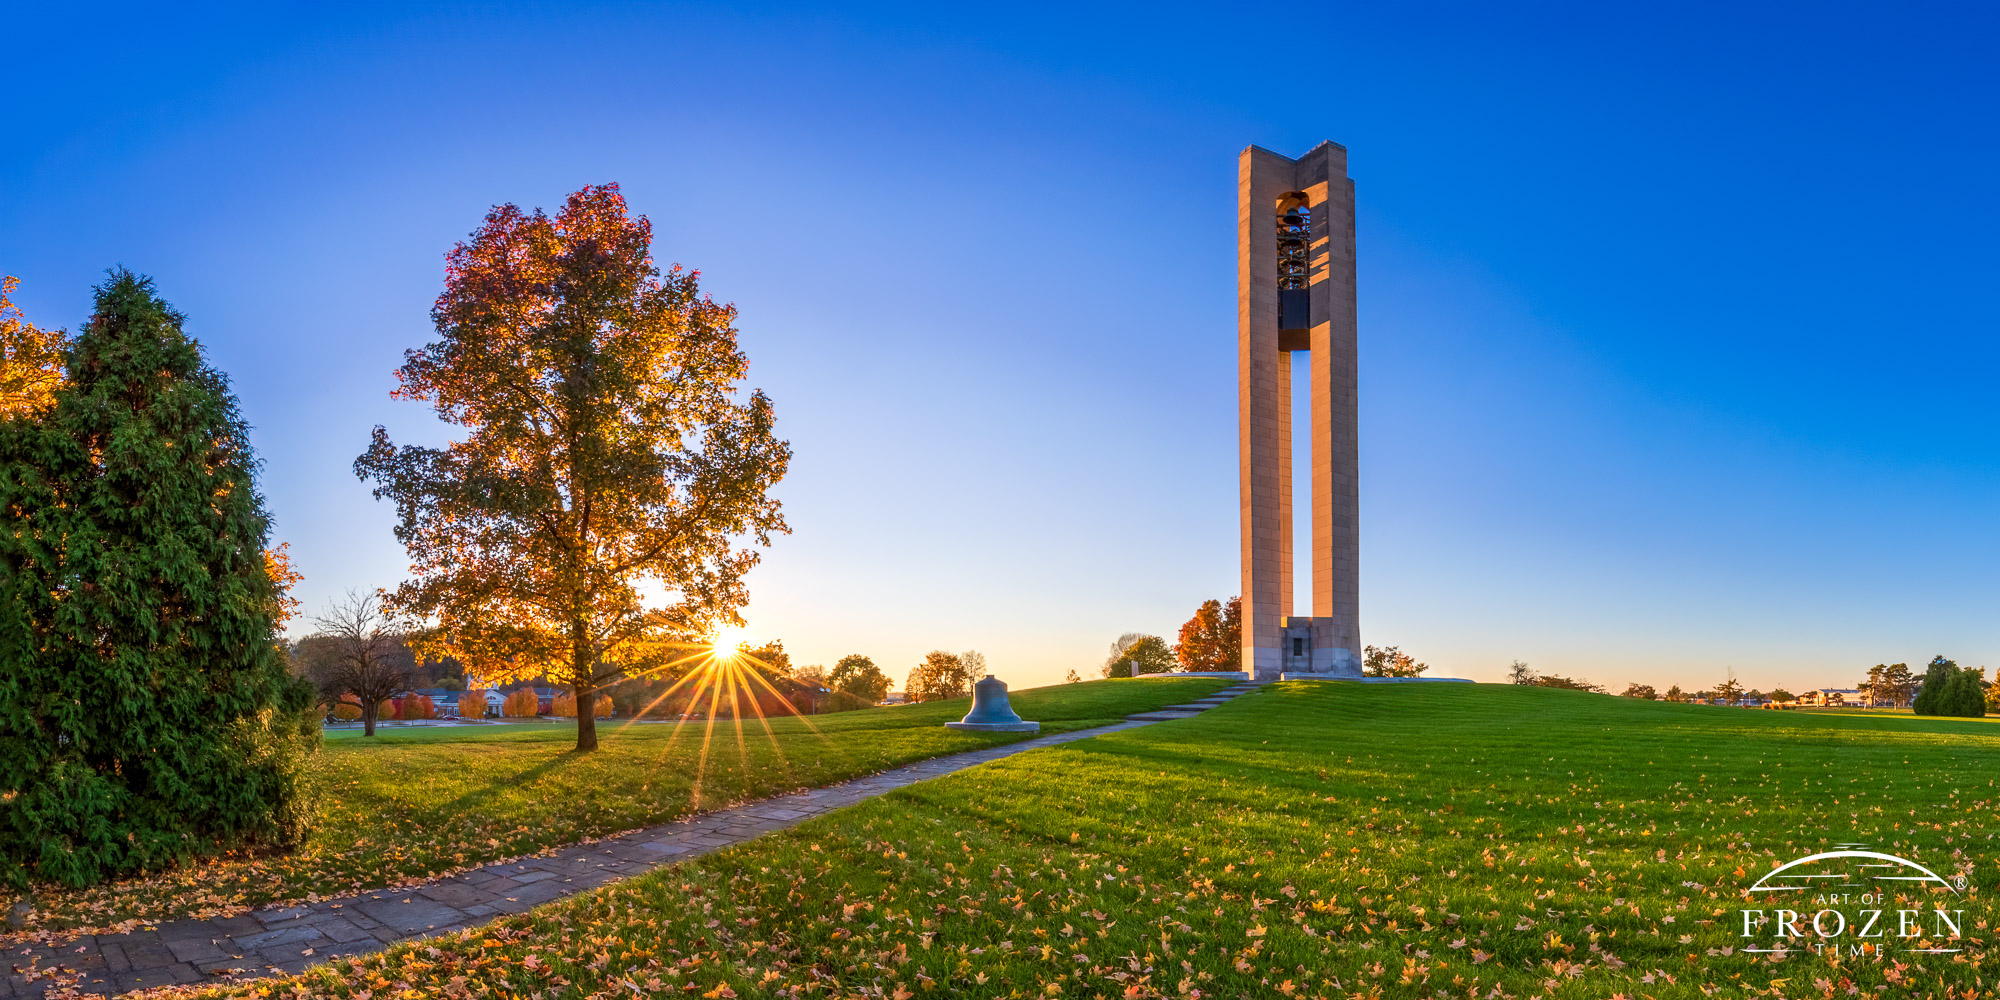 An autumn sunset painting Dayton’s Deeds Carillon in golden light as rays rake across the green grass and fall leaves